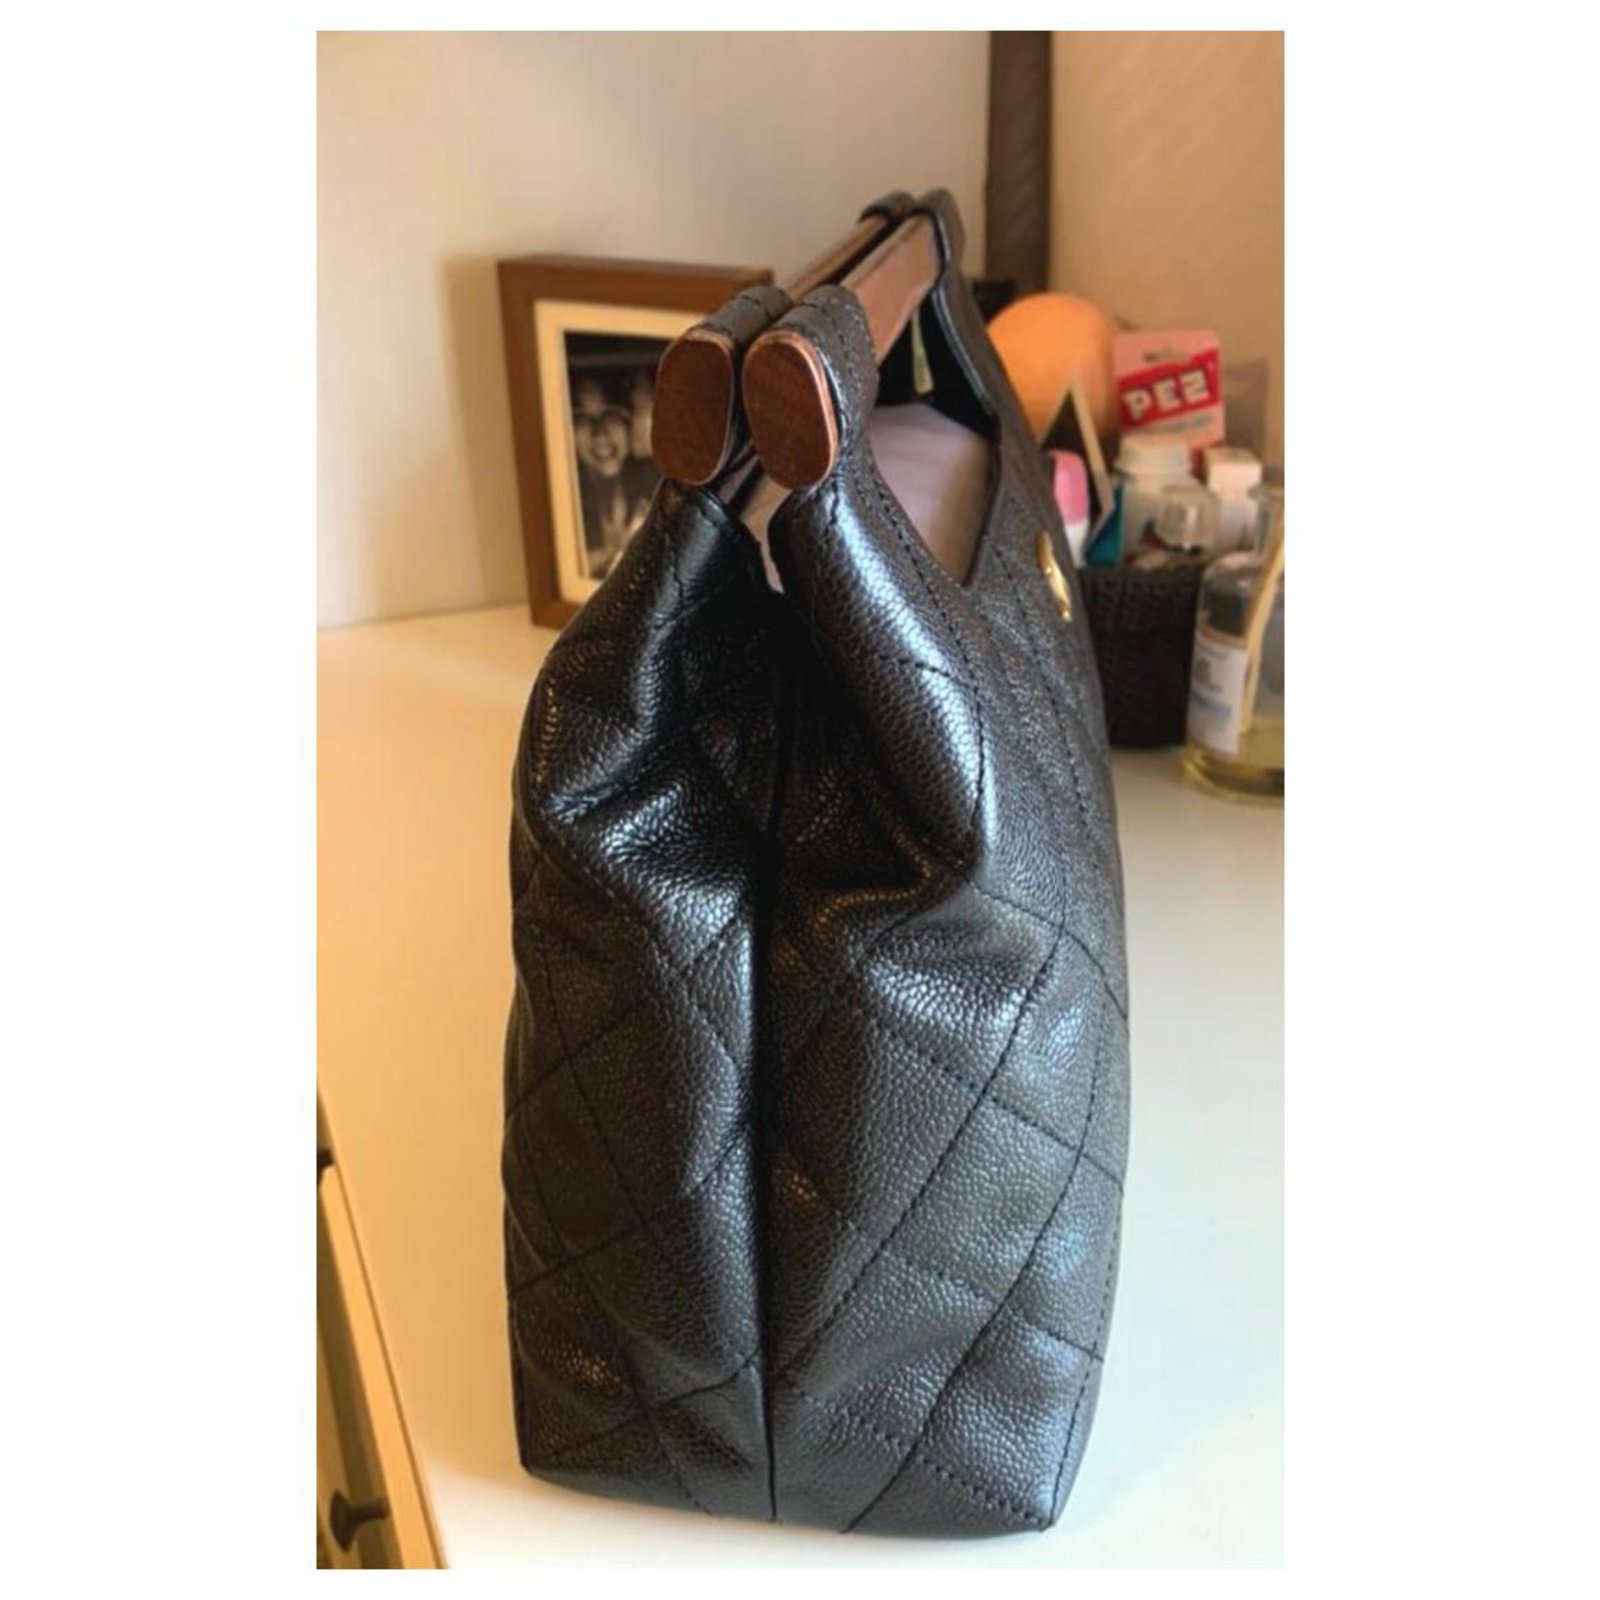 Authentic Used bags for sale - Yoogi's Closet